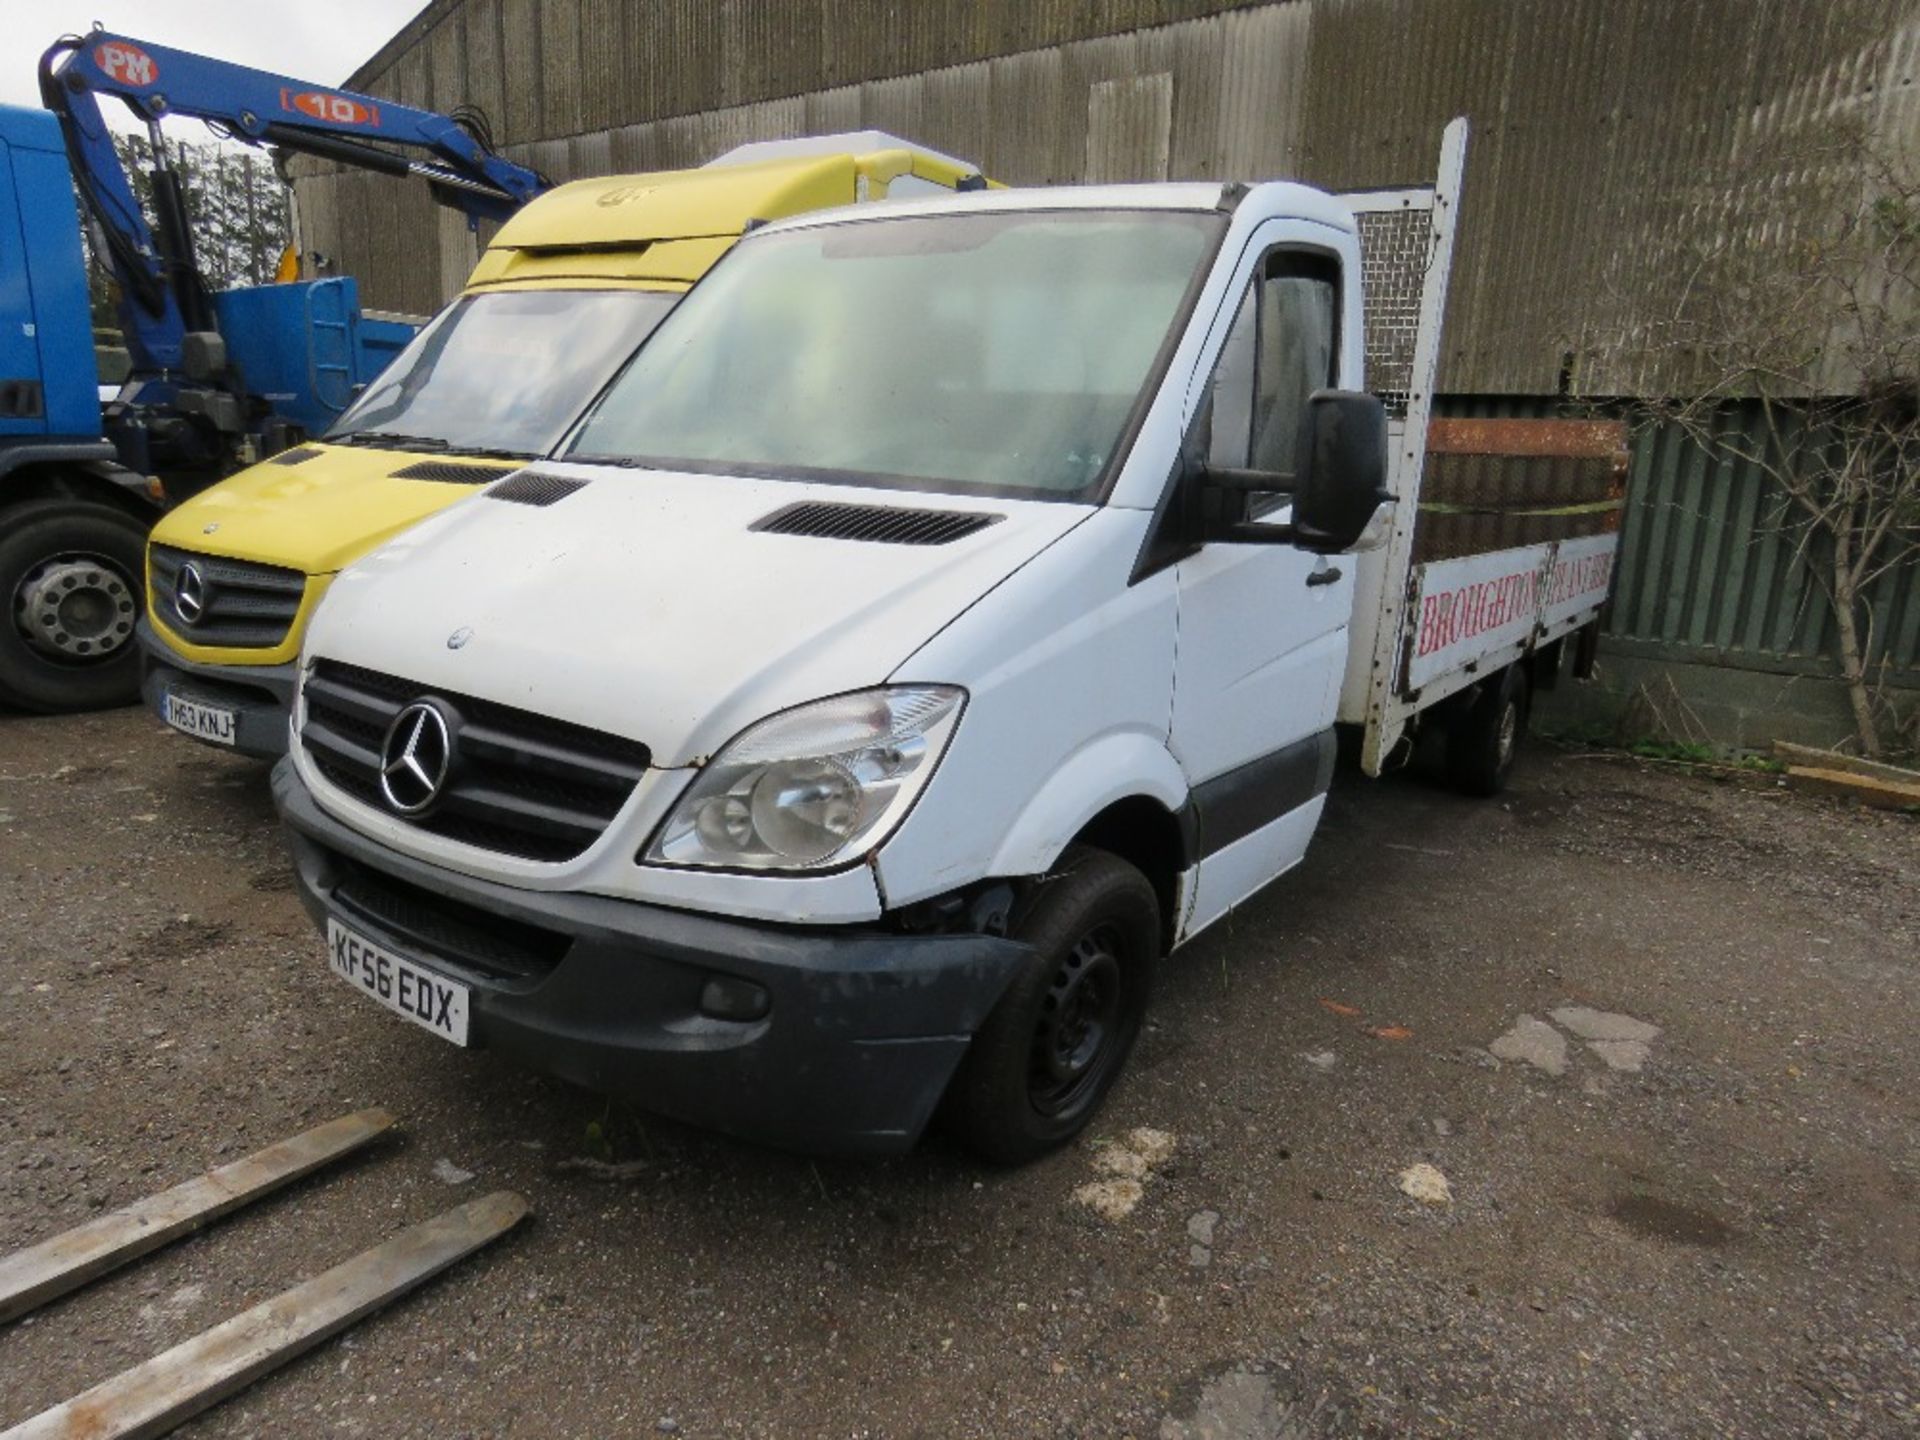 MERCEDES SPRINTER DROP SIDE TRUCK. REG:KF56EXY. TAIL LIFT. 14FT BODY APPROX. NON RUNN - Image 2 of 7